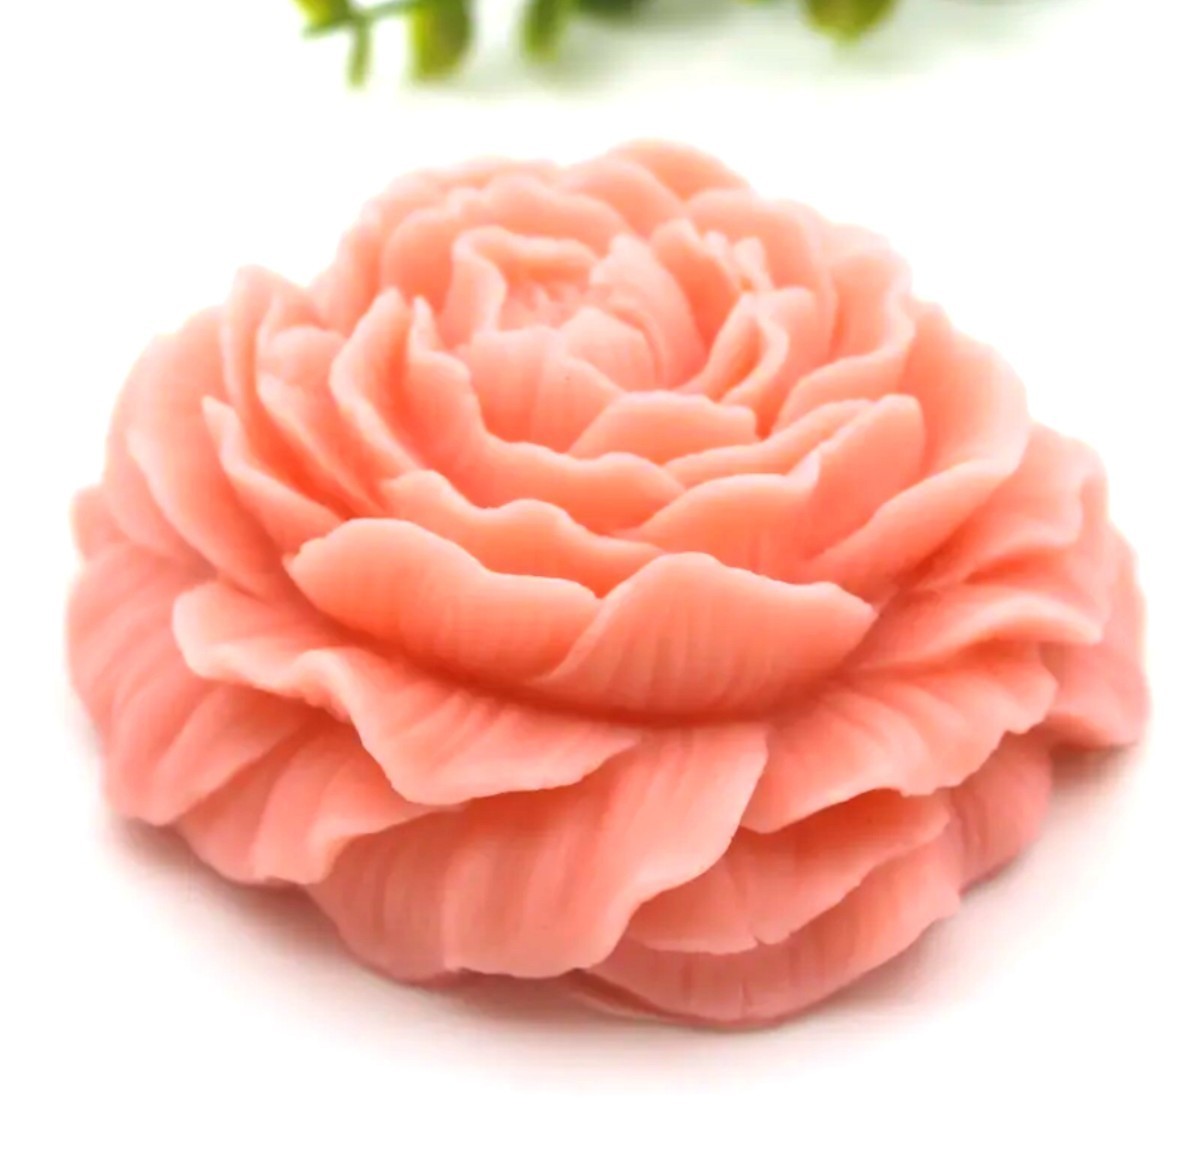  silicon mold rose candle candle type candle mold aroma Stone .... rose flower type mold solid Korea 